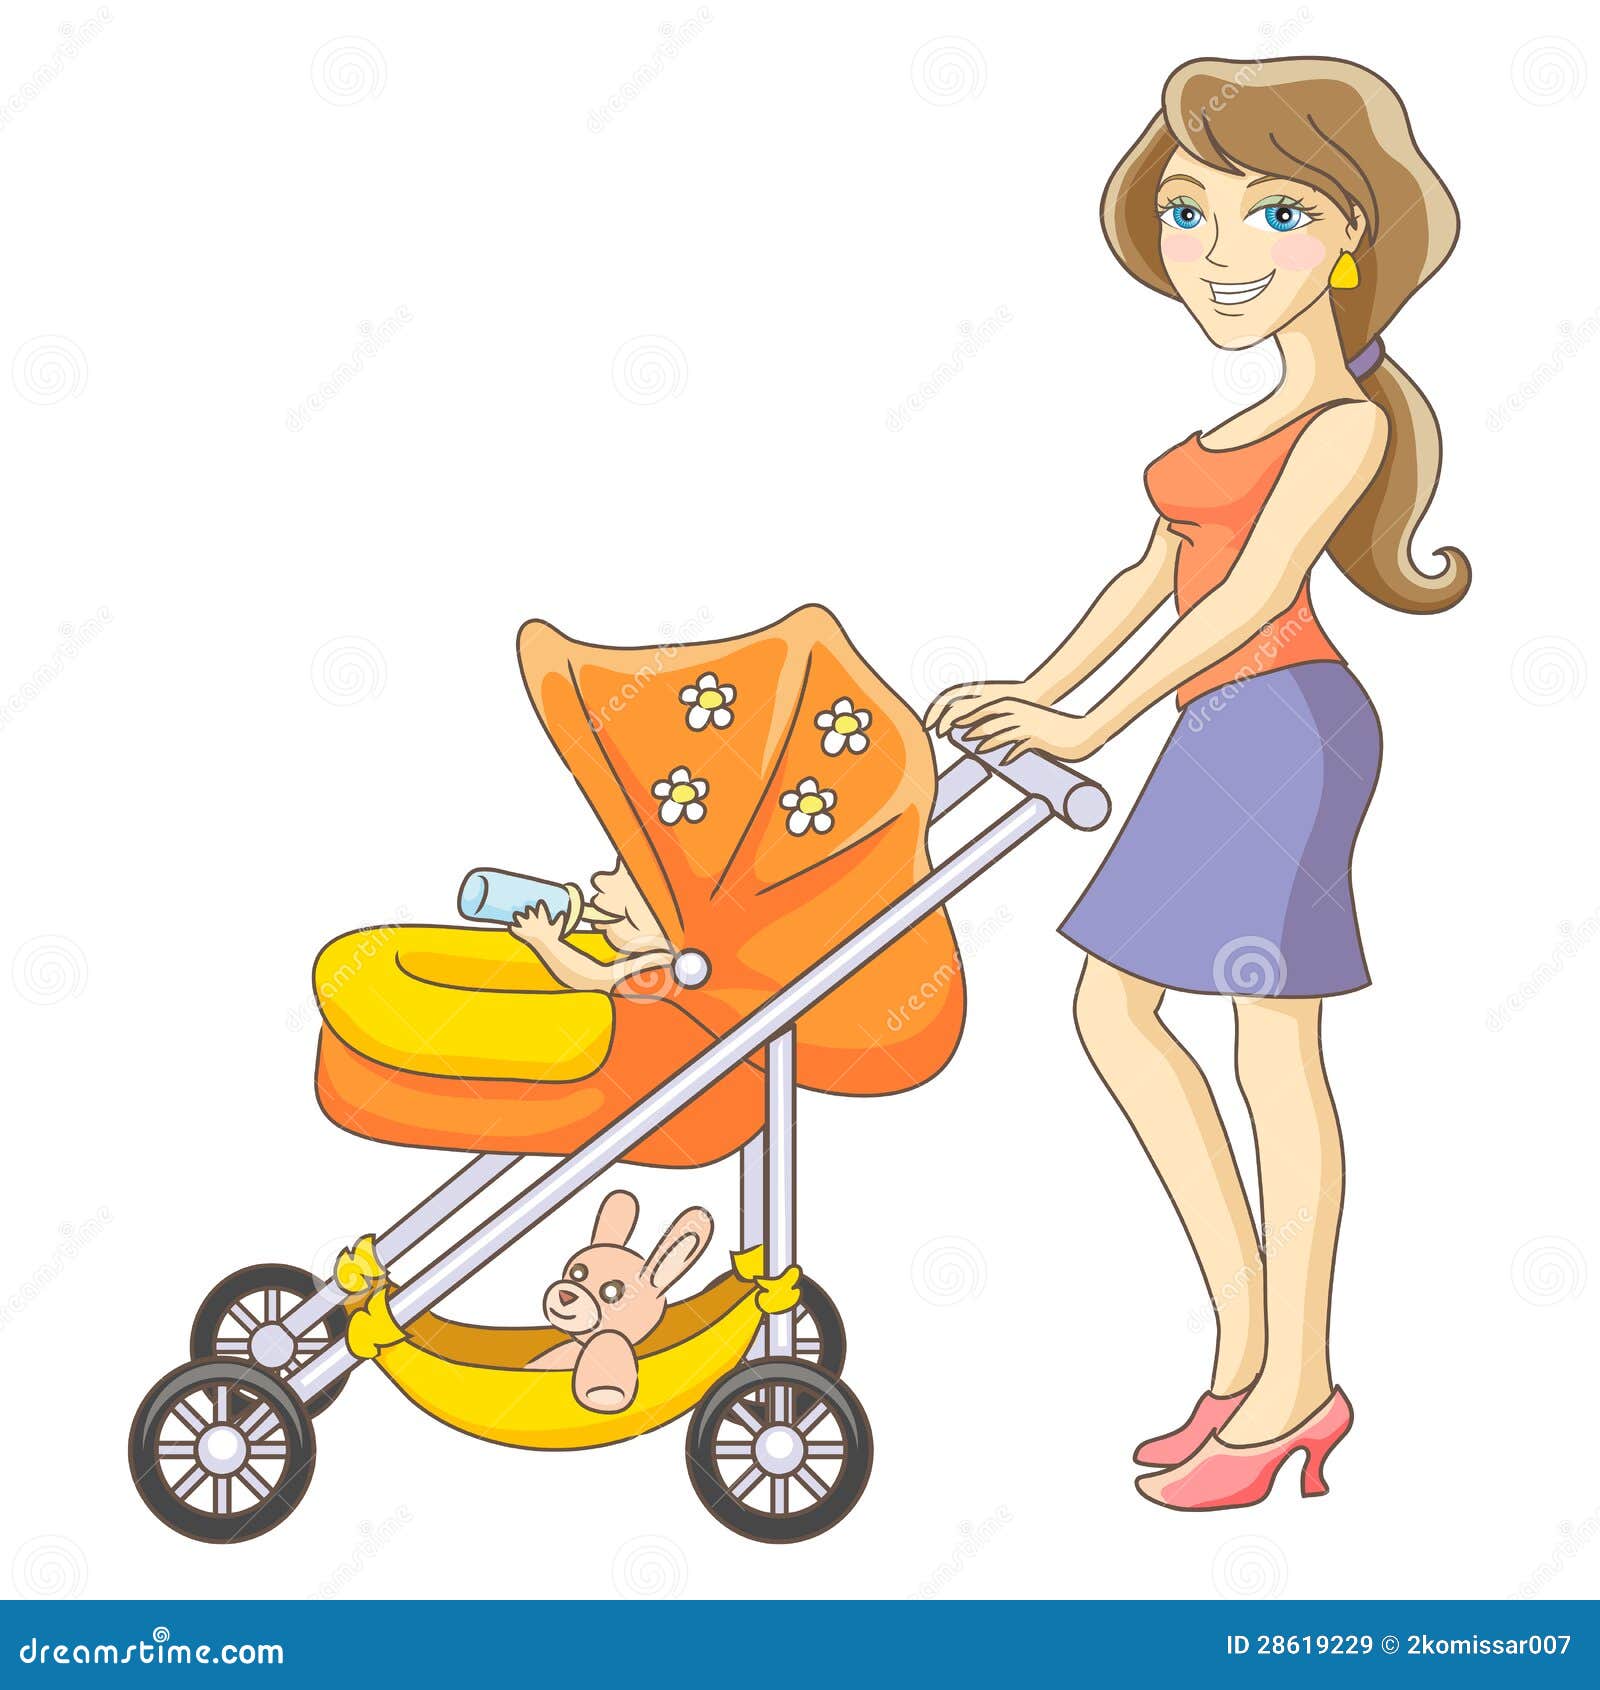 Mother and baby stroller stock vector. Illustration of mother - 28619229